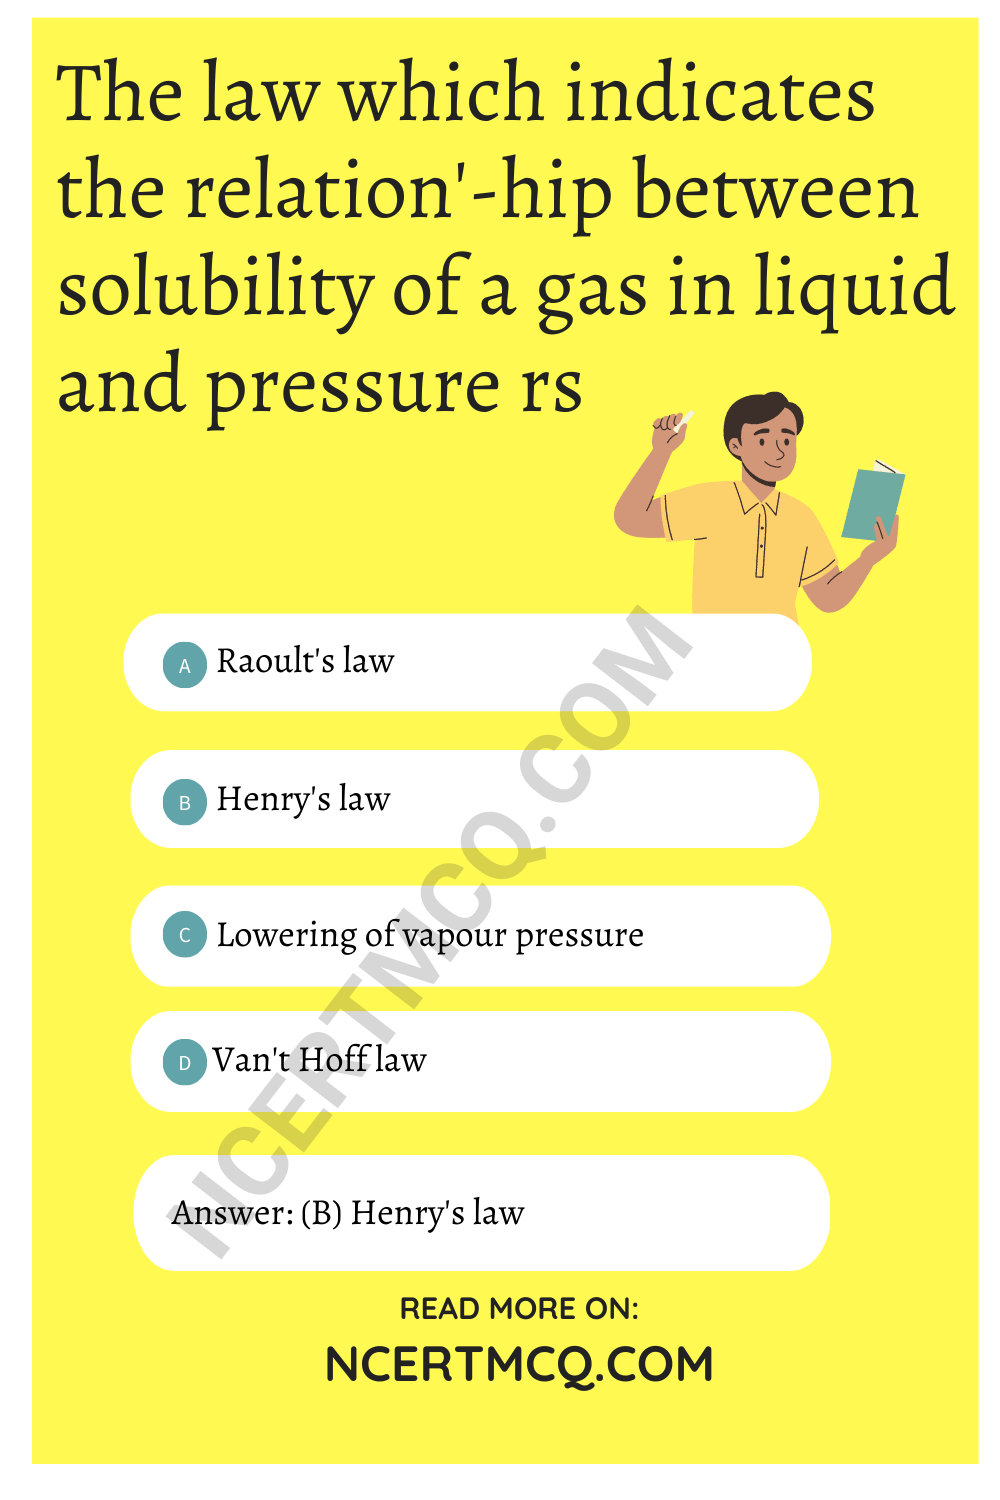 The law which indicates the relation'-hip between solubility of a gas in liquid and pressure rs